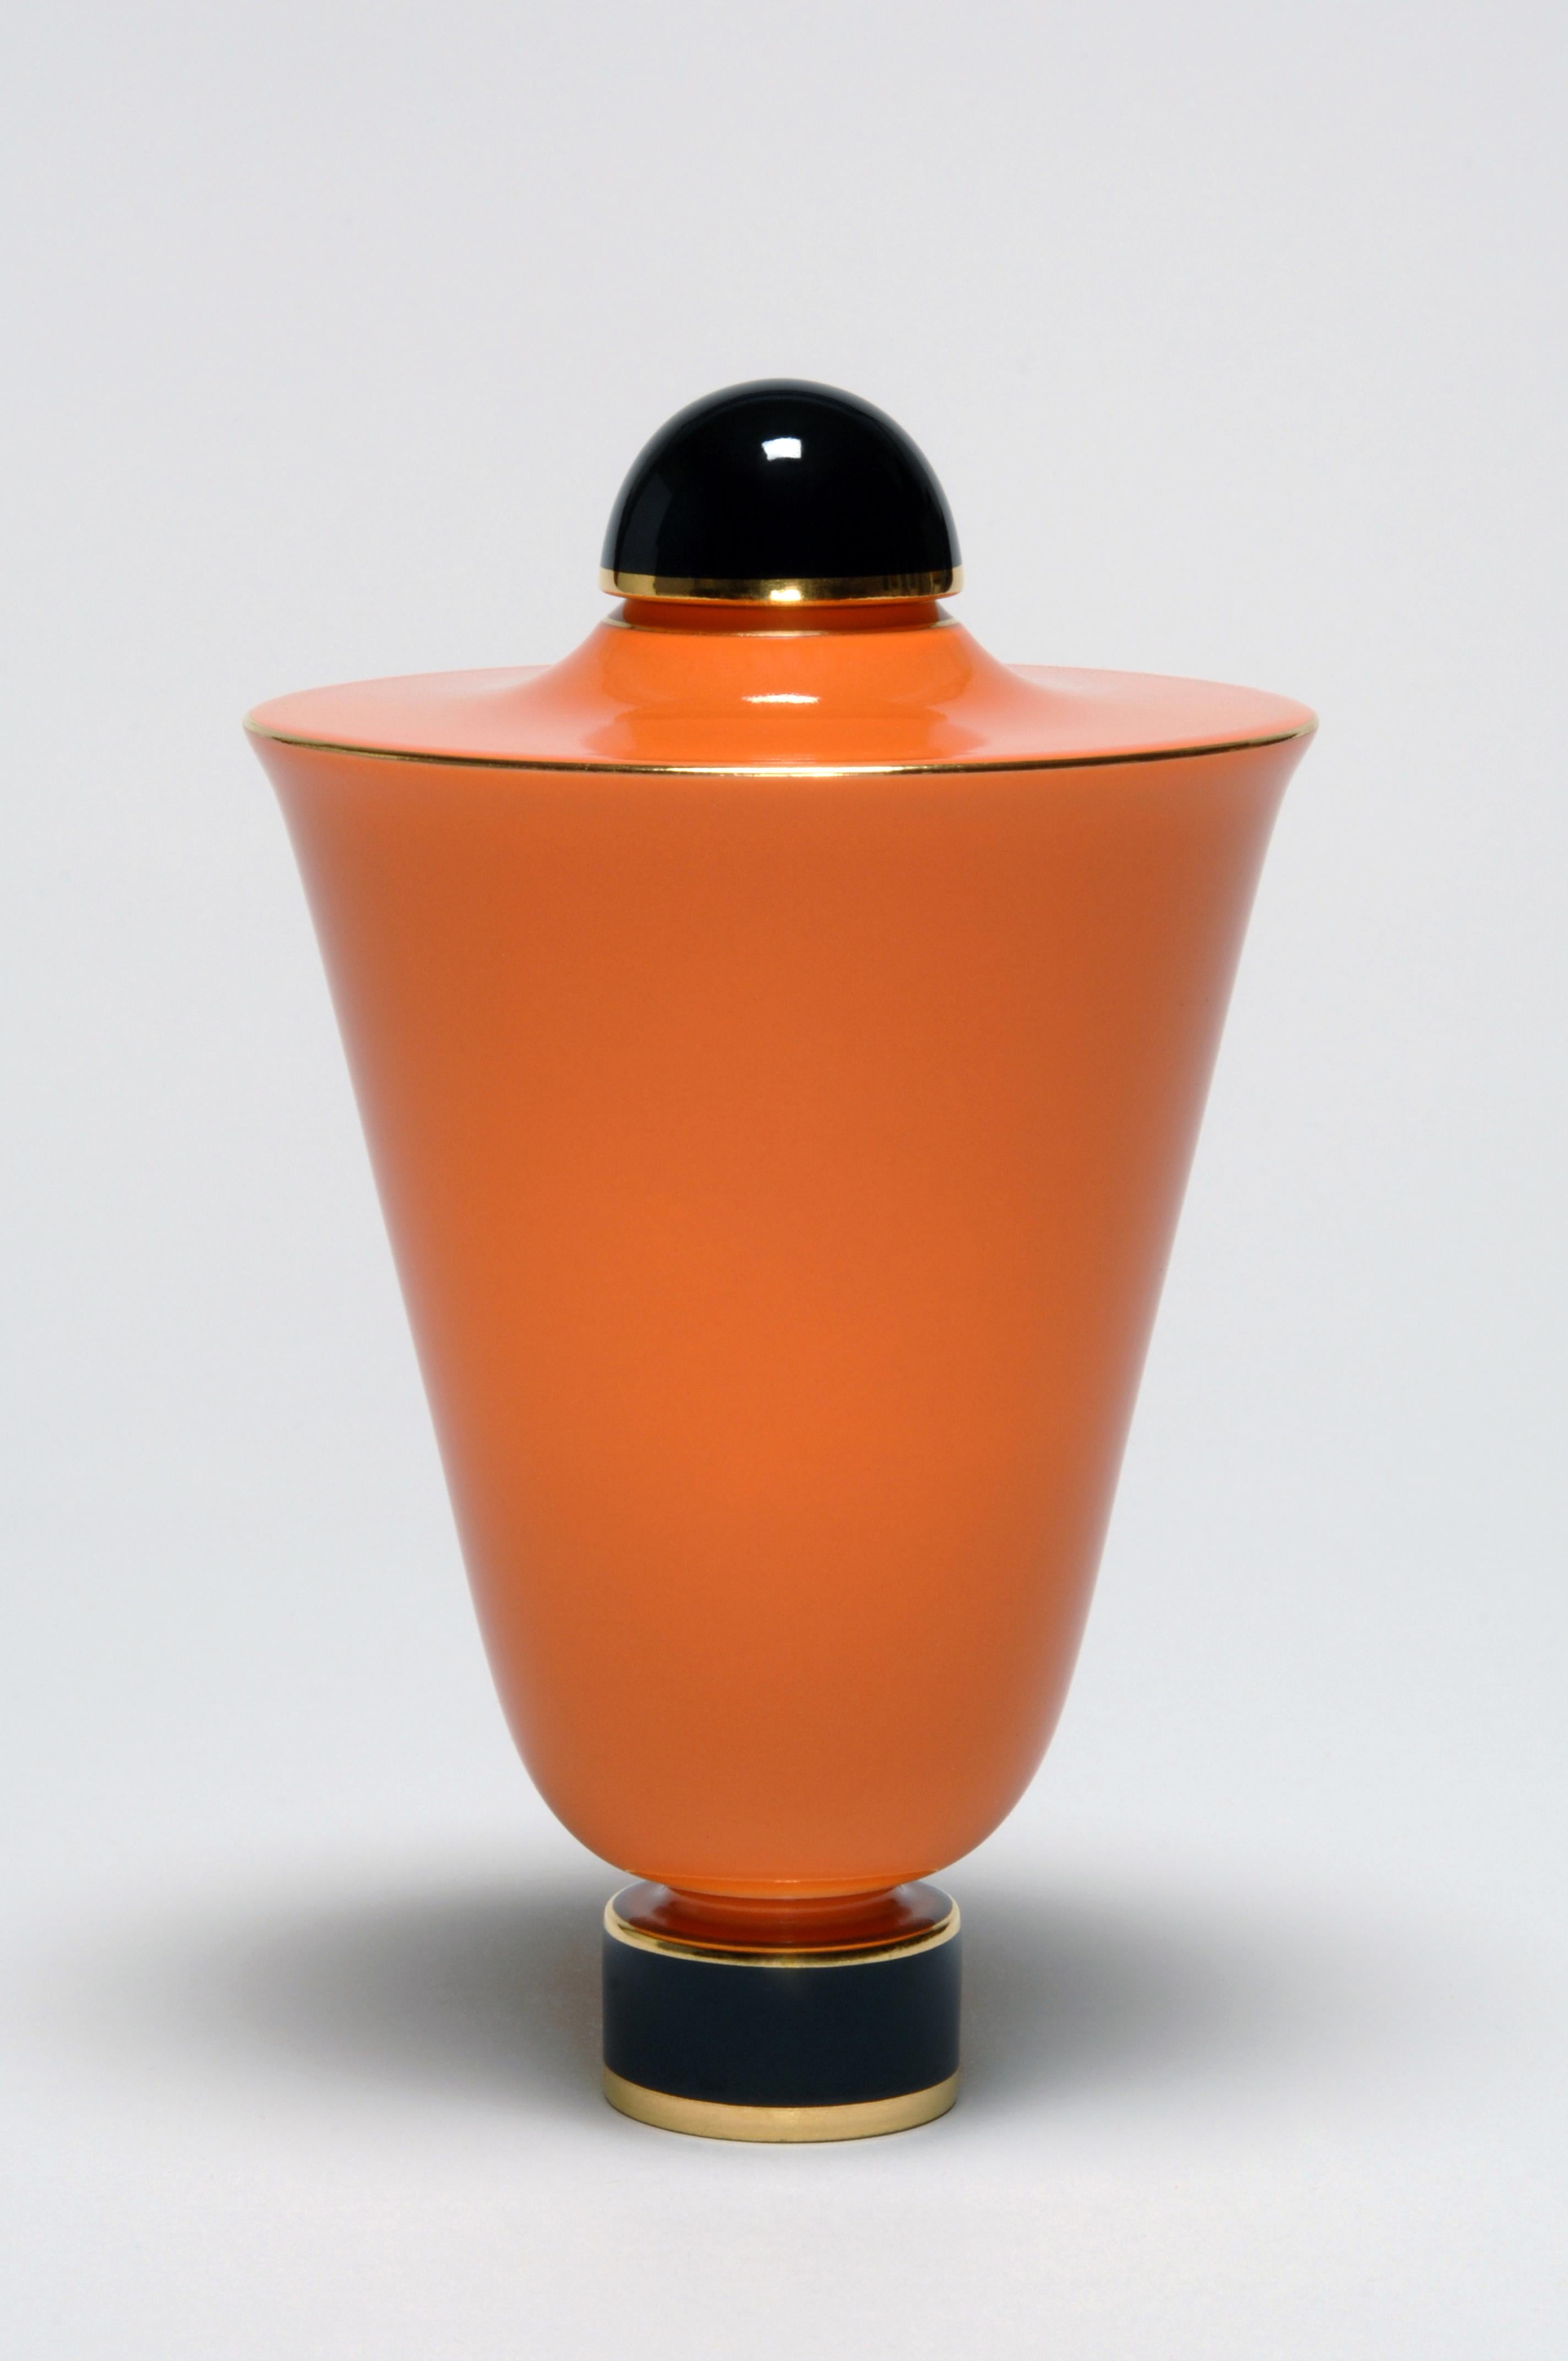 This vase was created in the 1920s by Émile-Jacques Ruhlmann for the Manufacture Royale de Sèvres. The cone-shaped body of the vase is mounted on a circular foot hand-painted. The deep orange of Sèvres color pigments / glaze is brought out by the